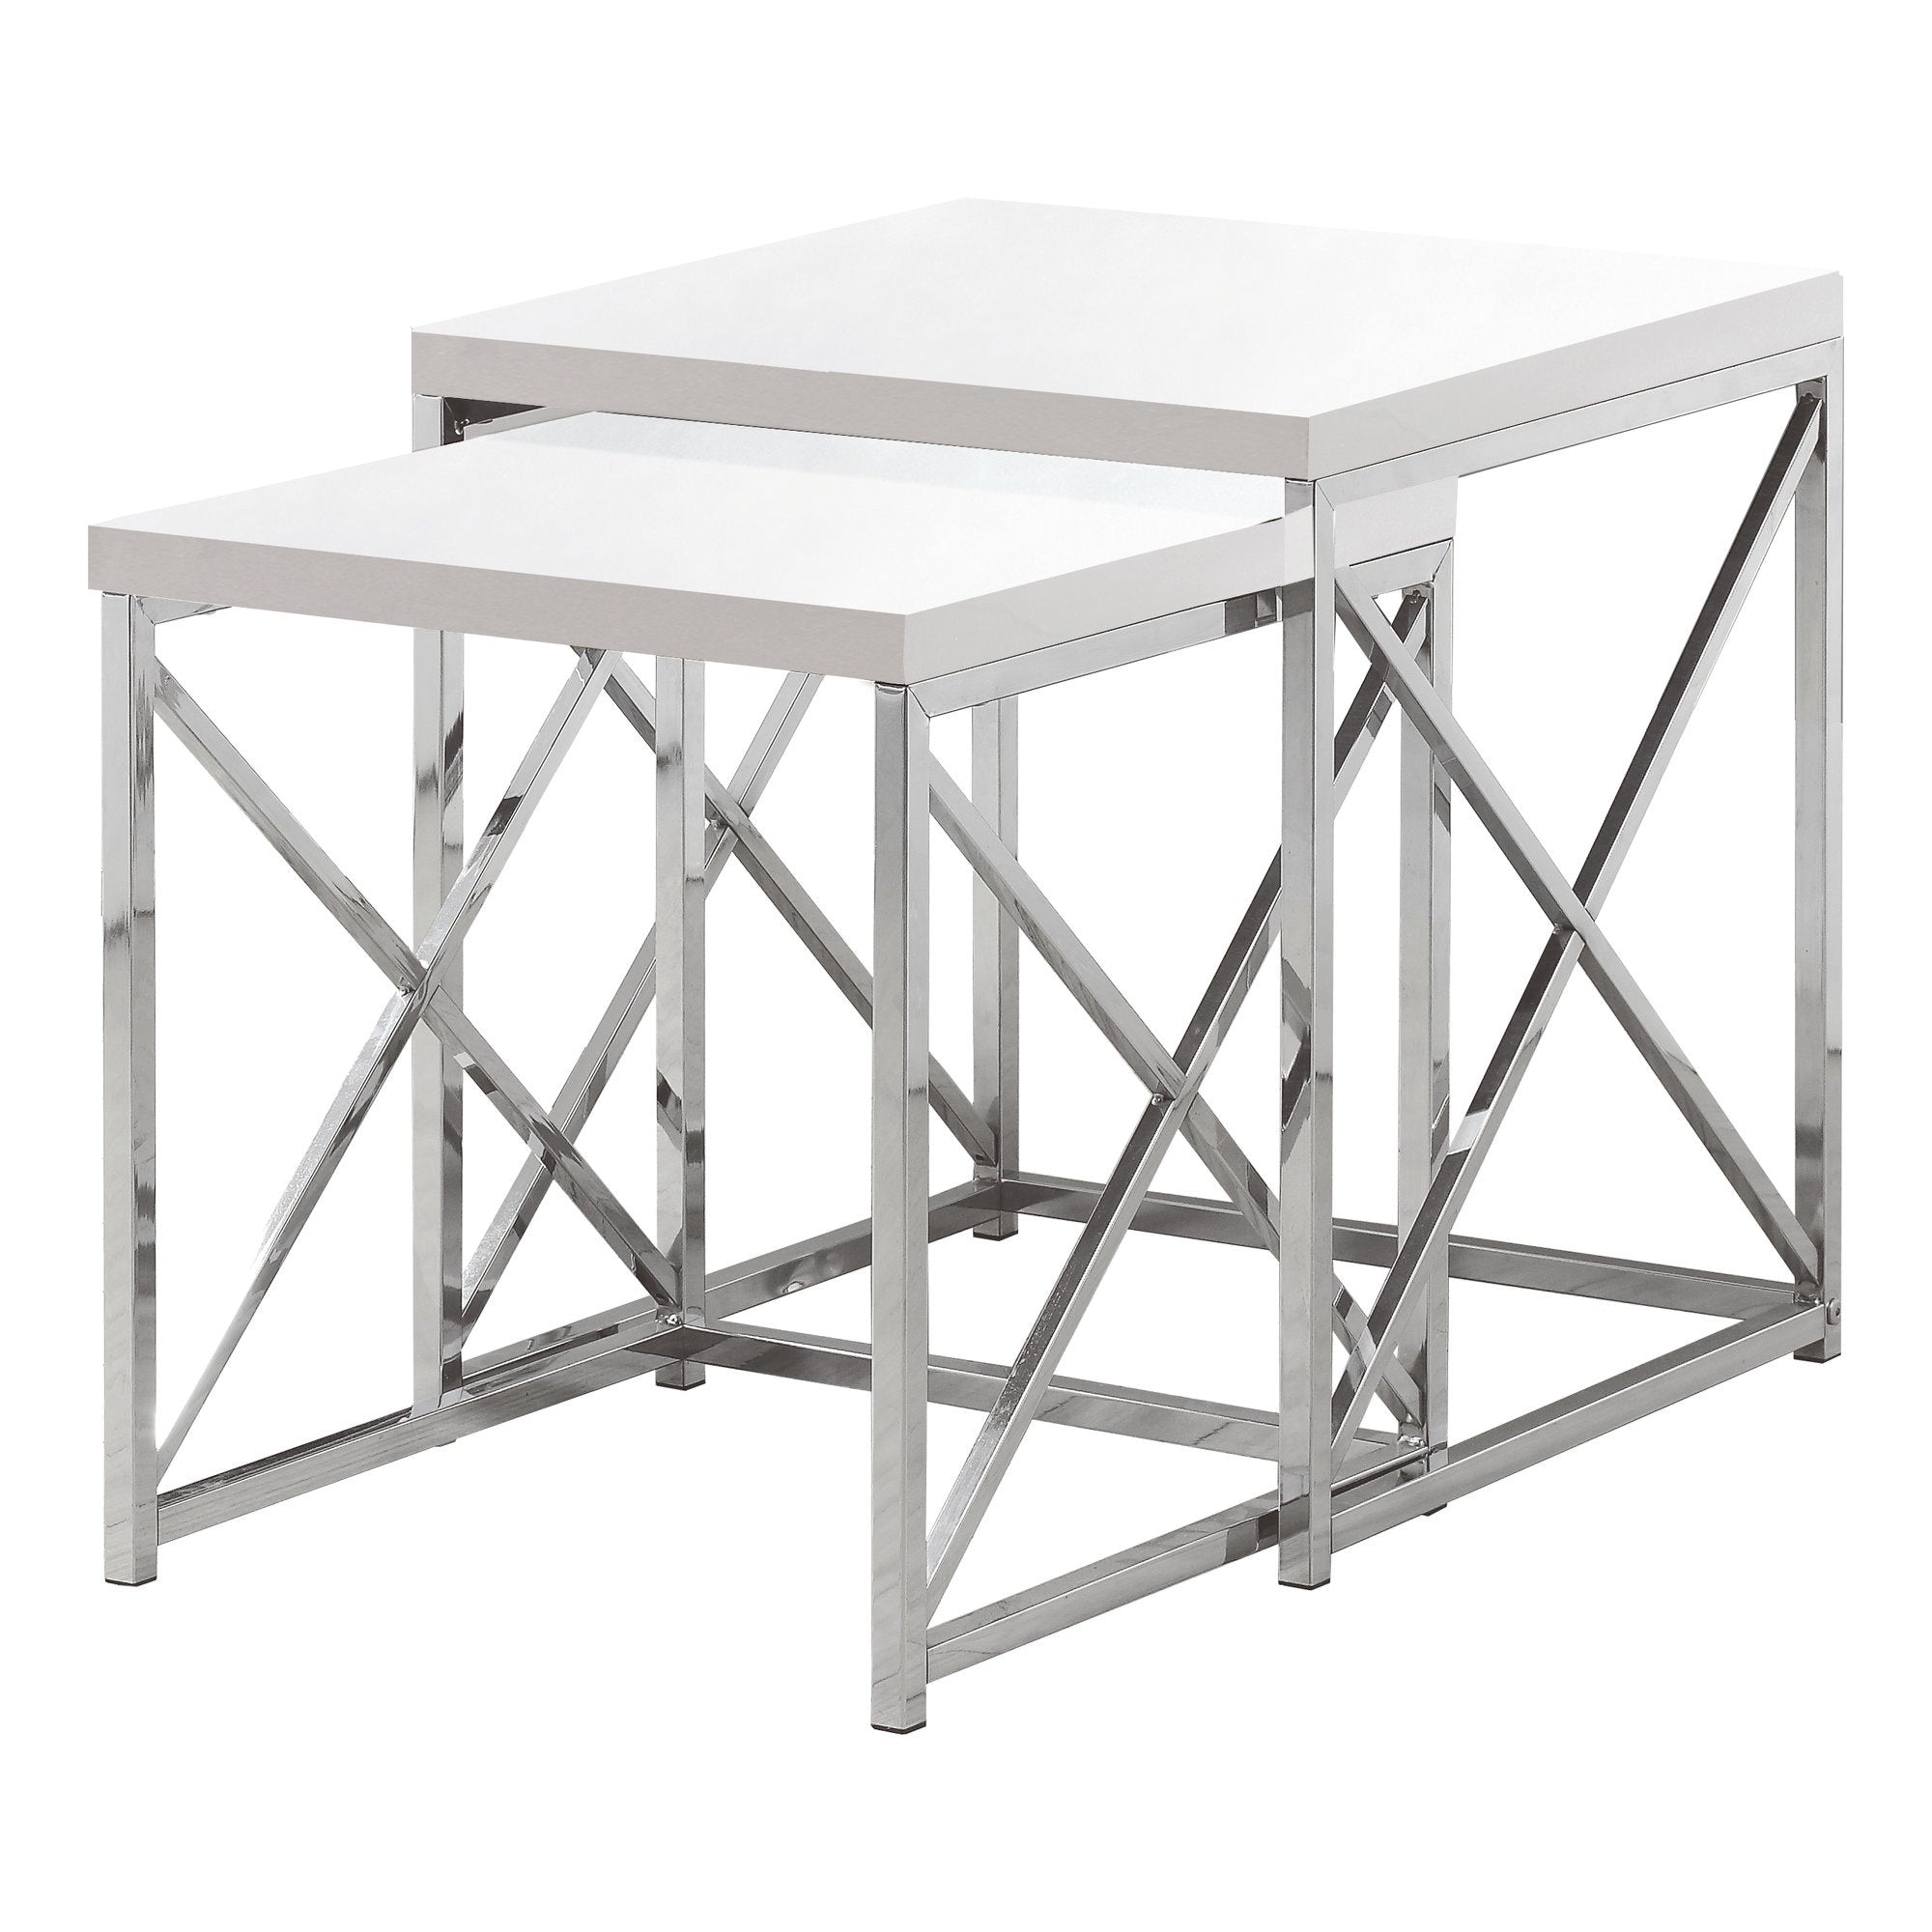 MN-823025    Nesting Table, Set Of 2, Side, End, Metal, Accent, Living Room, Bedroom, Metal Base, Laminate, Glossy White, Chrome, Contemporary, Modern